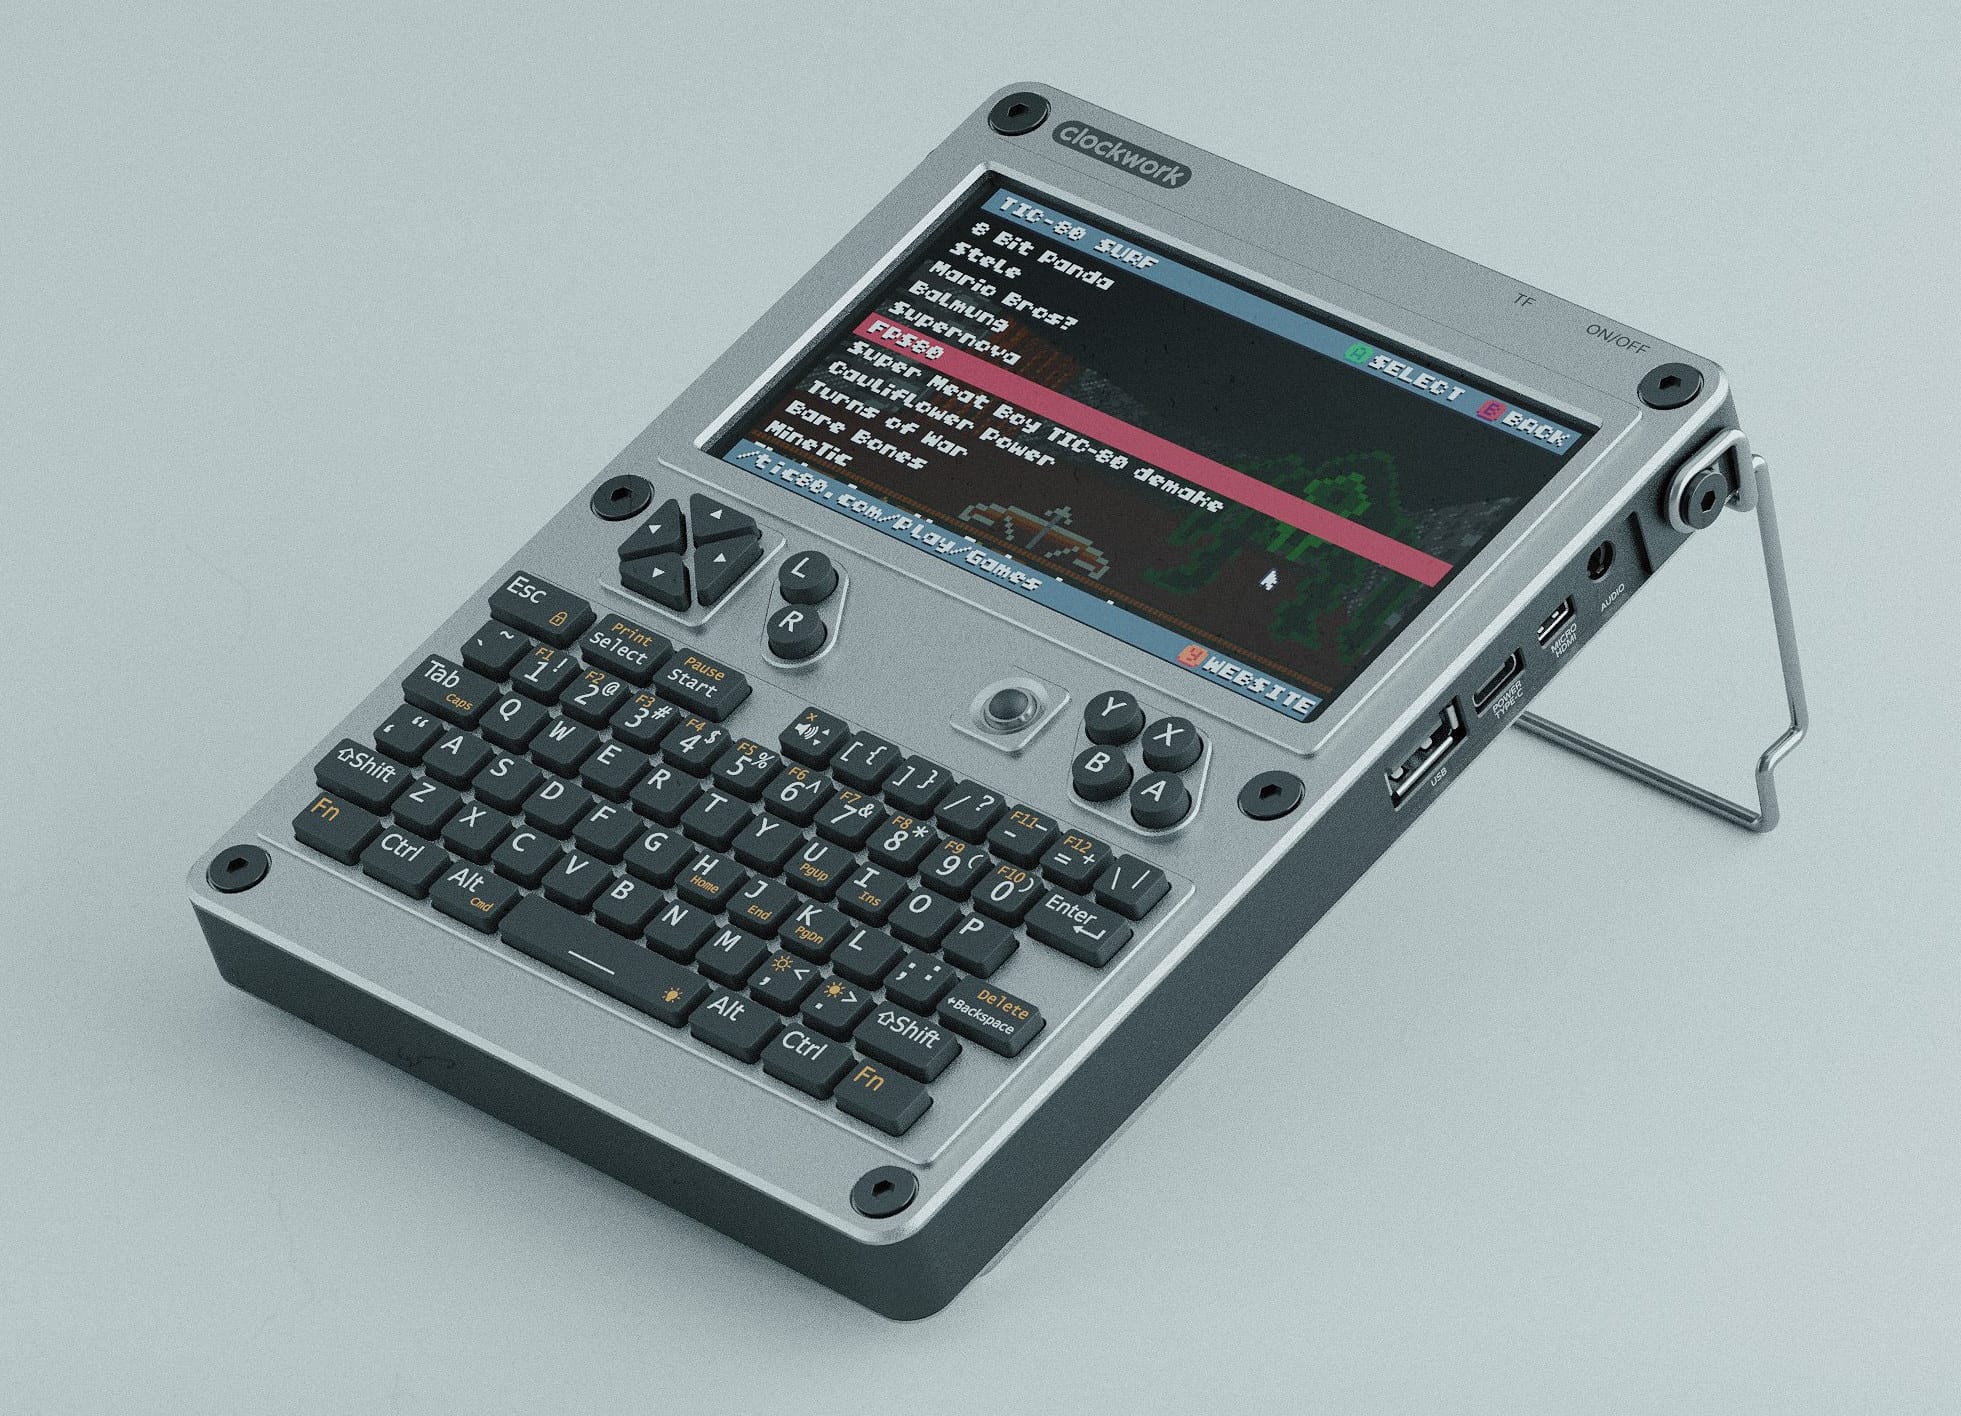 uConsole portable handheld computer